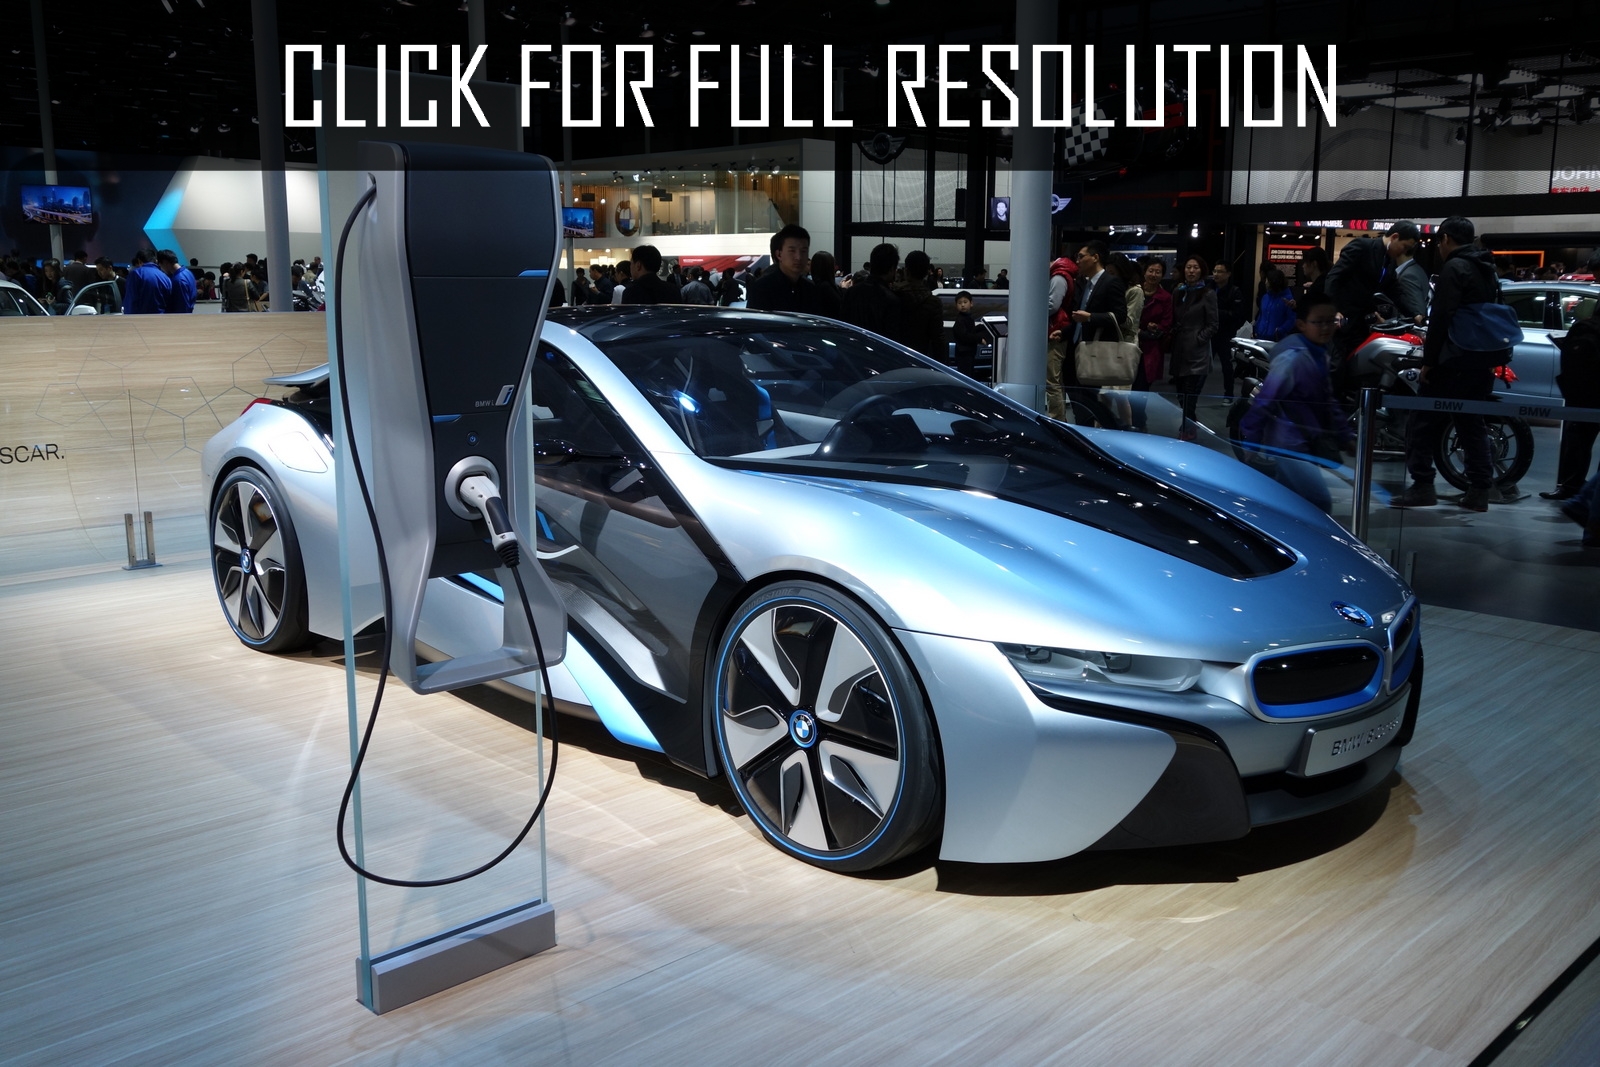 Bmw I8 Electric Car amazing photo gallery, some information and